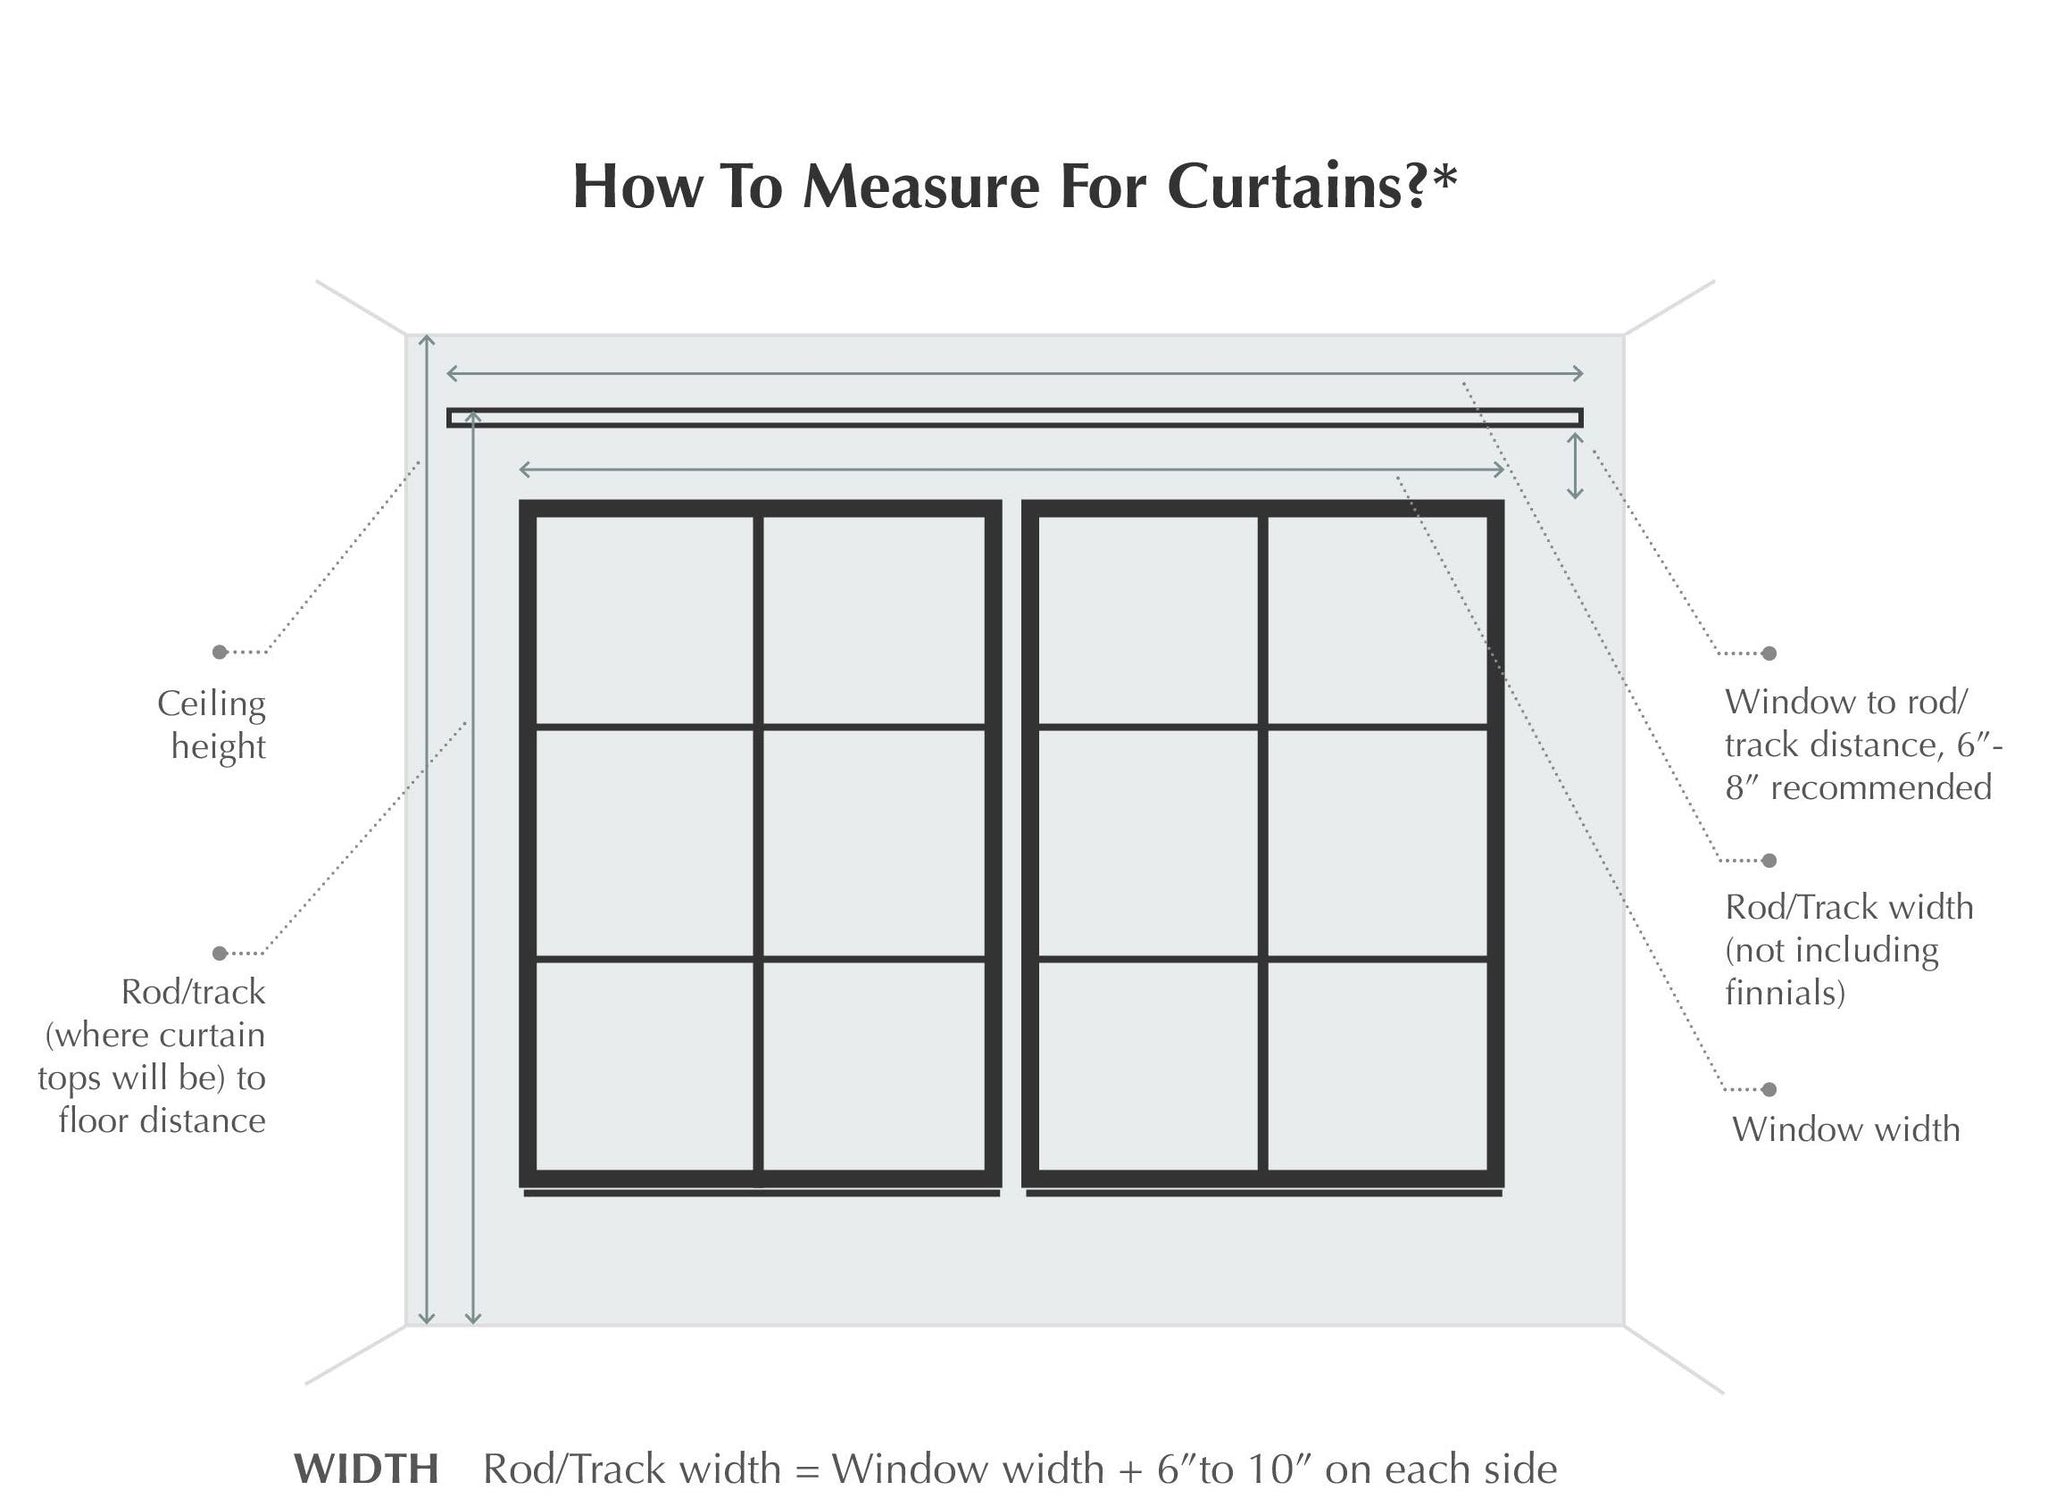 How To Measure For Curtains Custom Made Curtain Size Vs